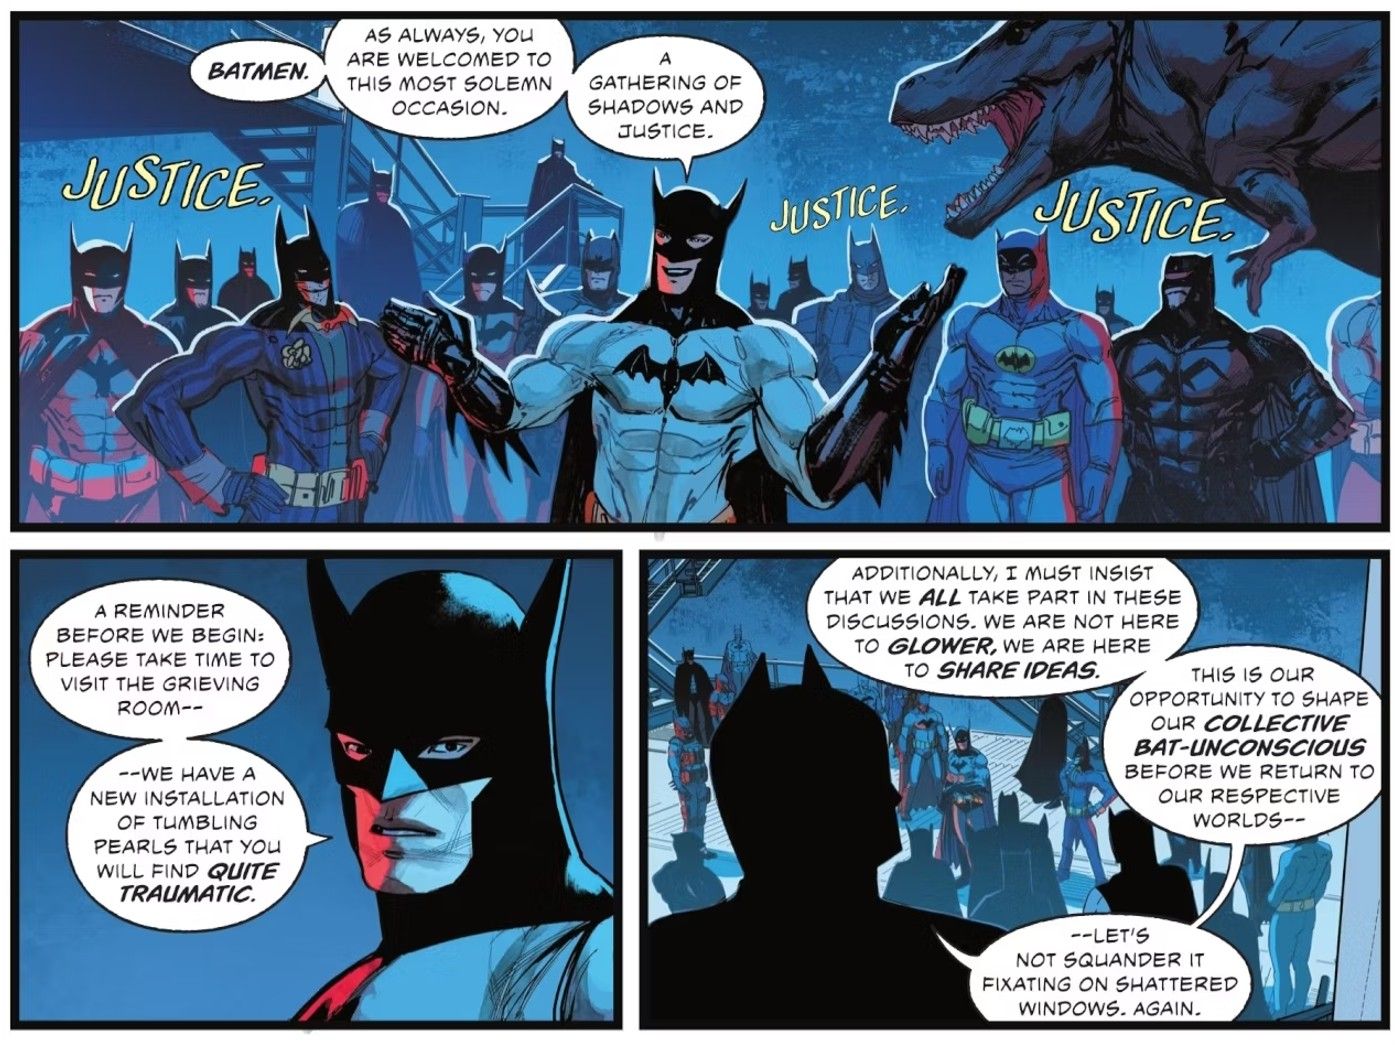 Comic book panels: many versions of Batman gather in the Batcave to talk to each other.